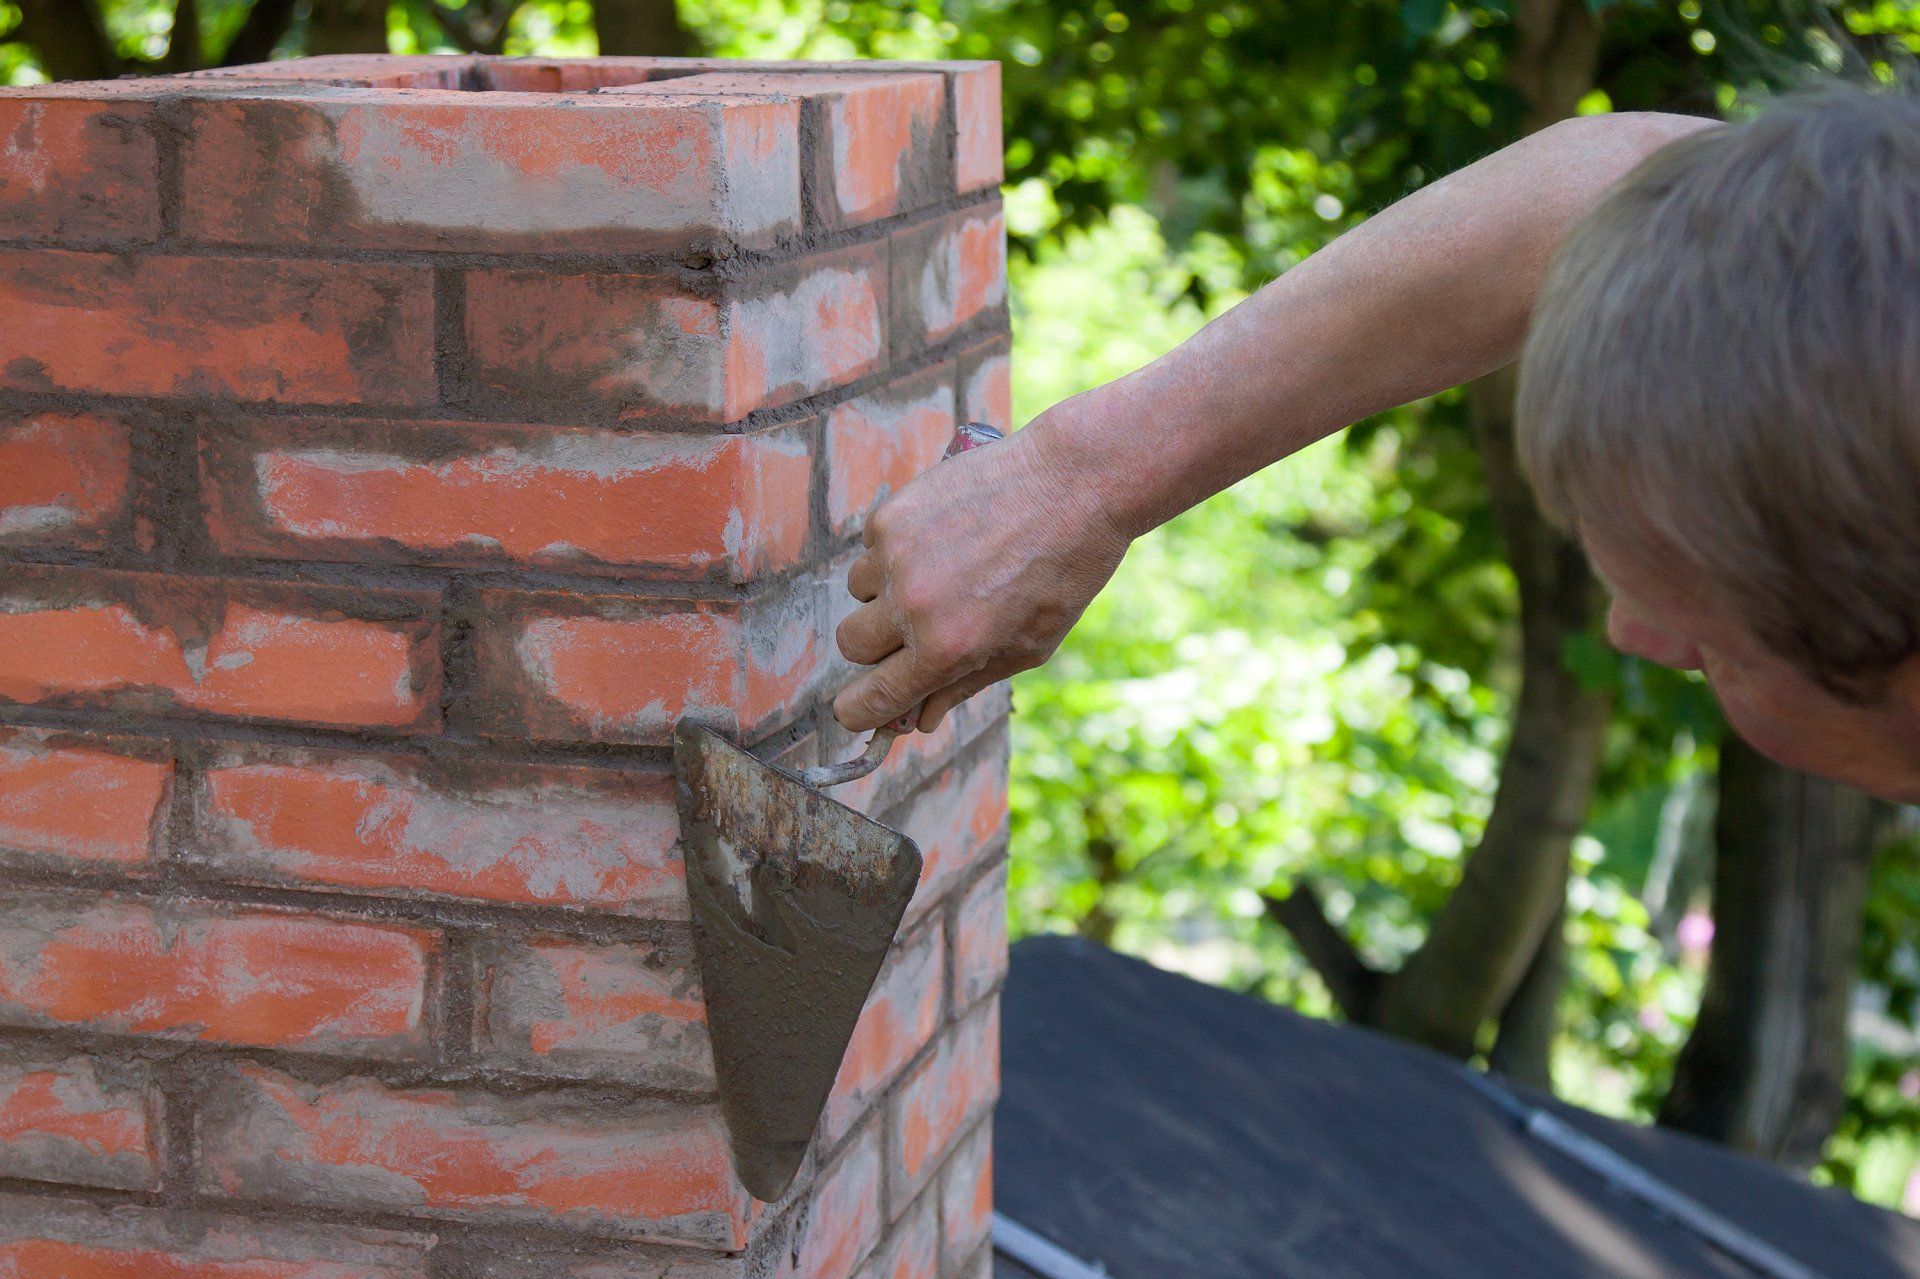 A man is using a trowel to apply mortar to a brick chimney.